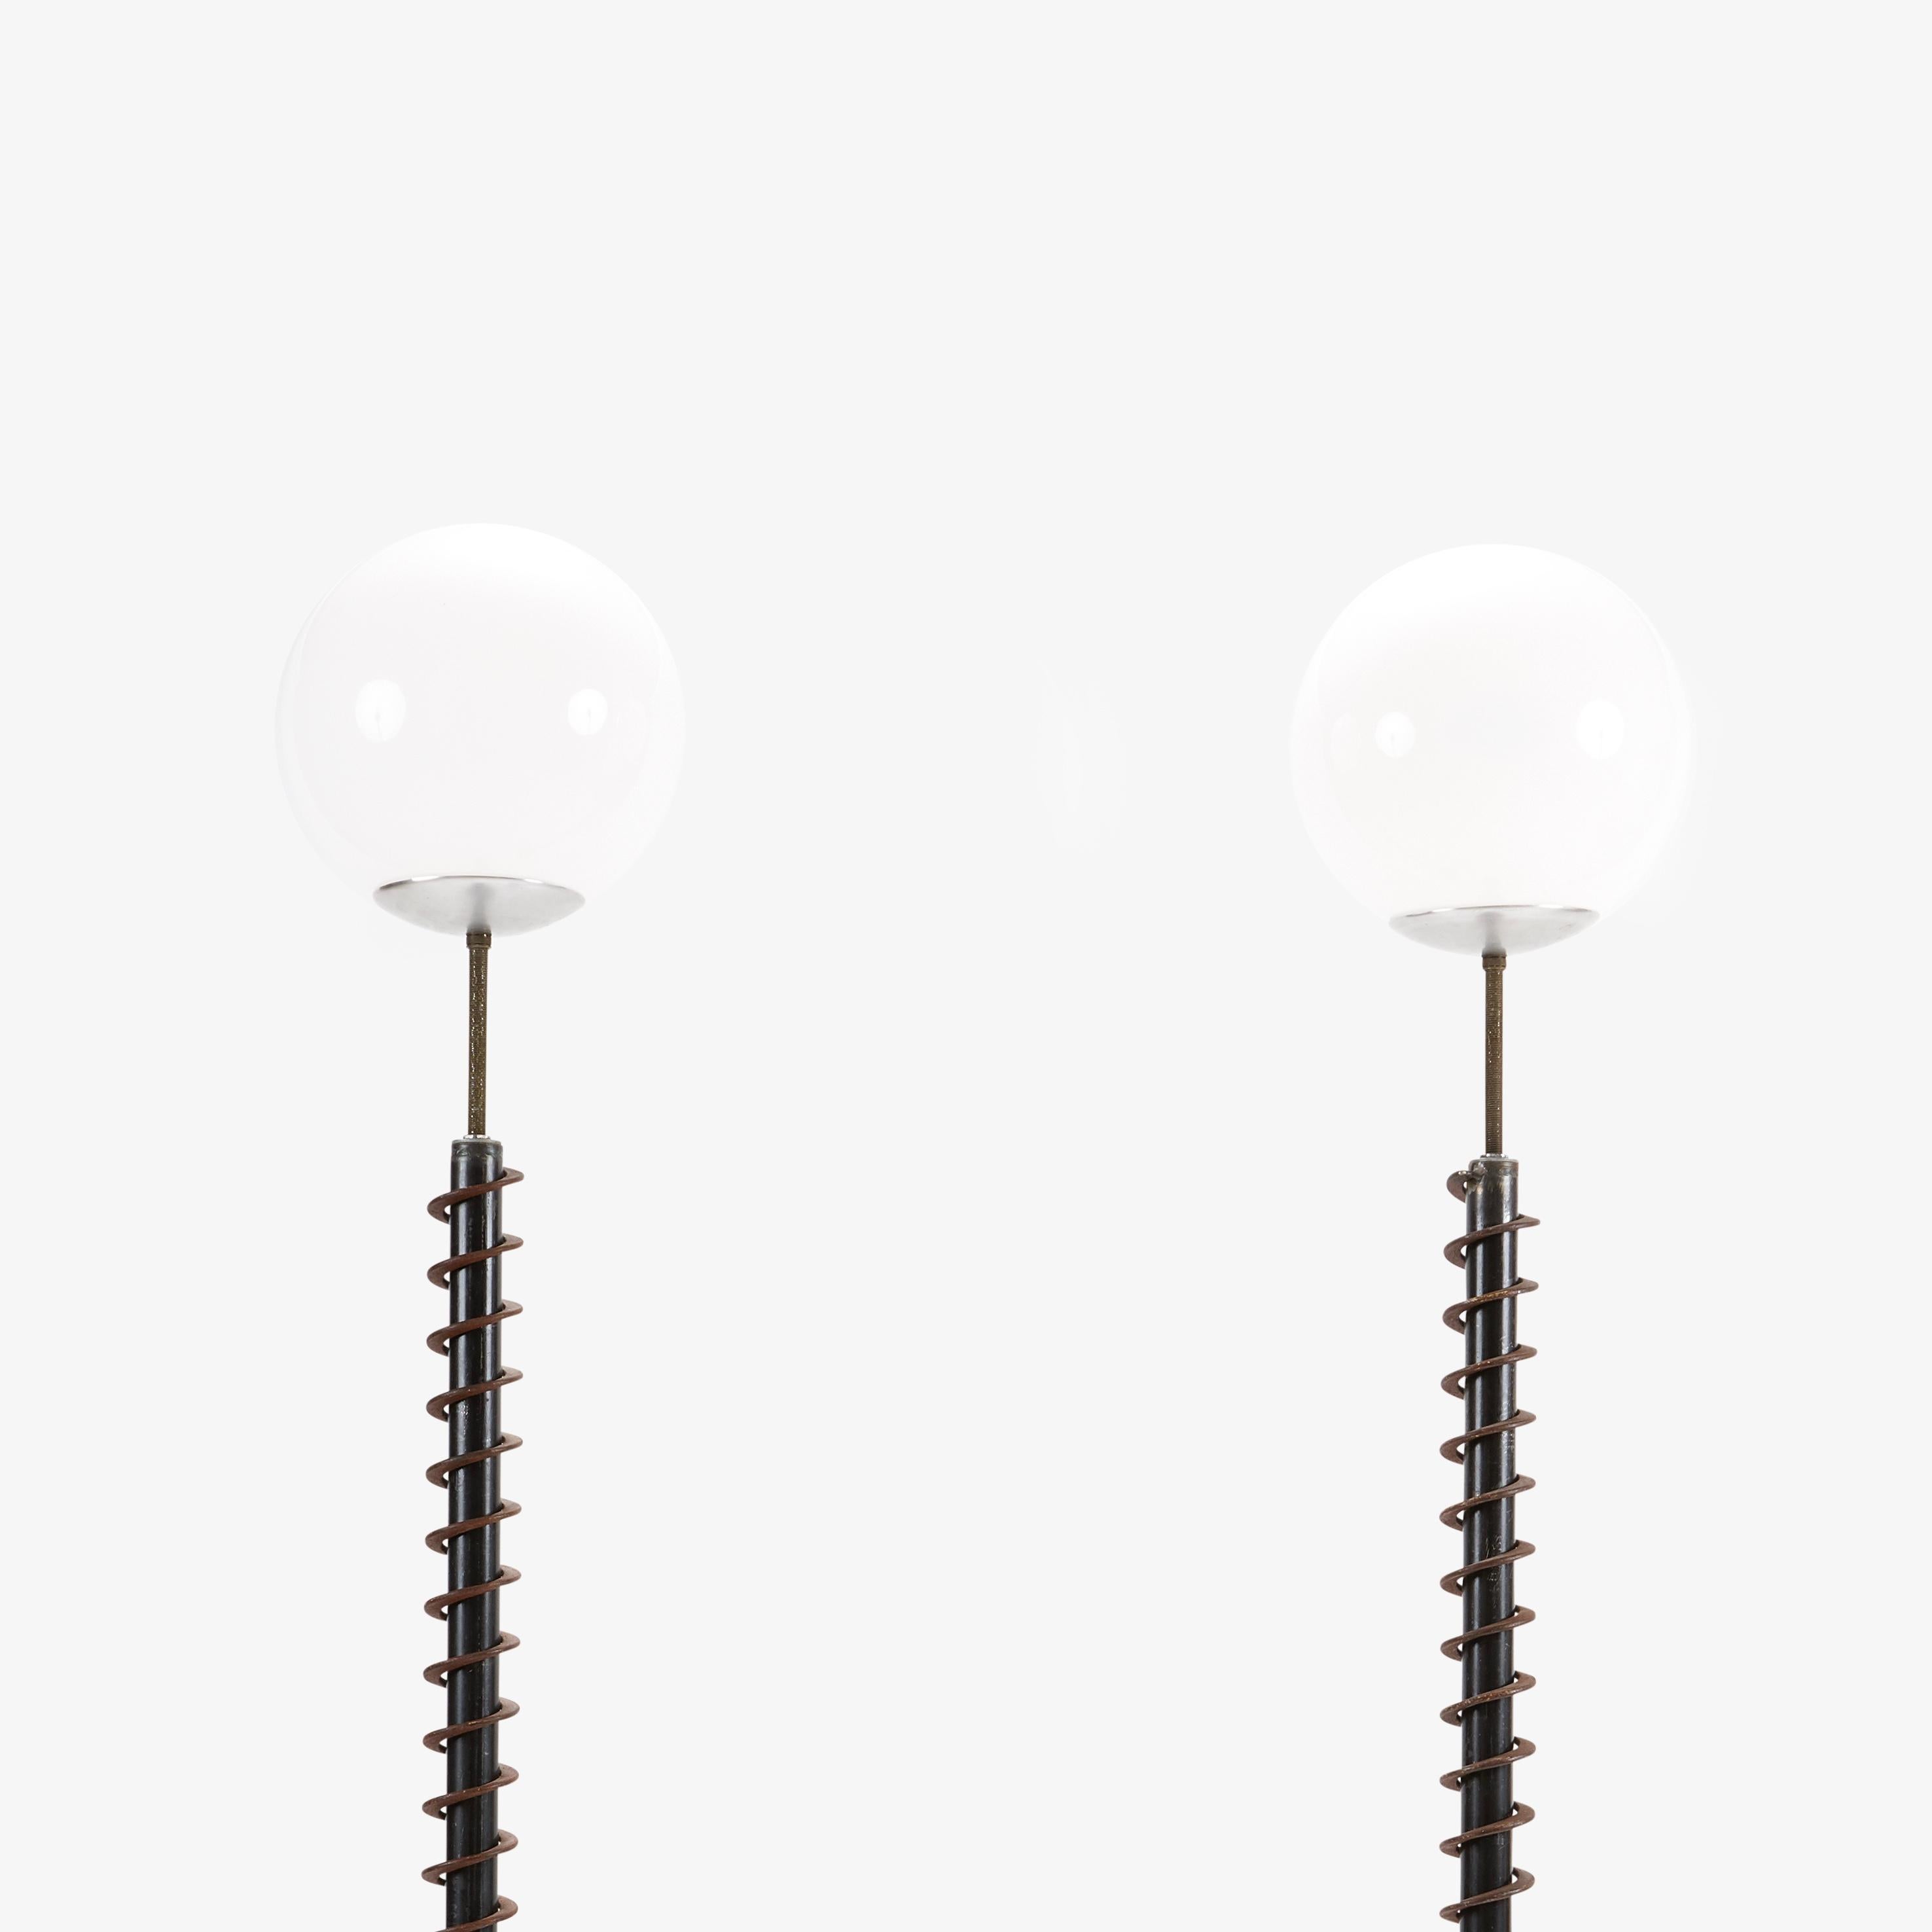 Pair of floor lamps by renowned Chicago artist Ted Harris. Lamps are constructed from repurposed industrial machinery parts. They are touch activated with three levels of illumination, by tapping the metal base of the globe. 

78” H, 11” D base,